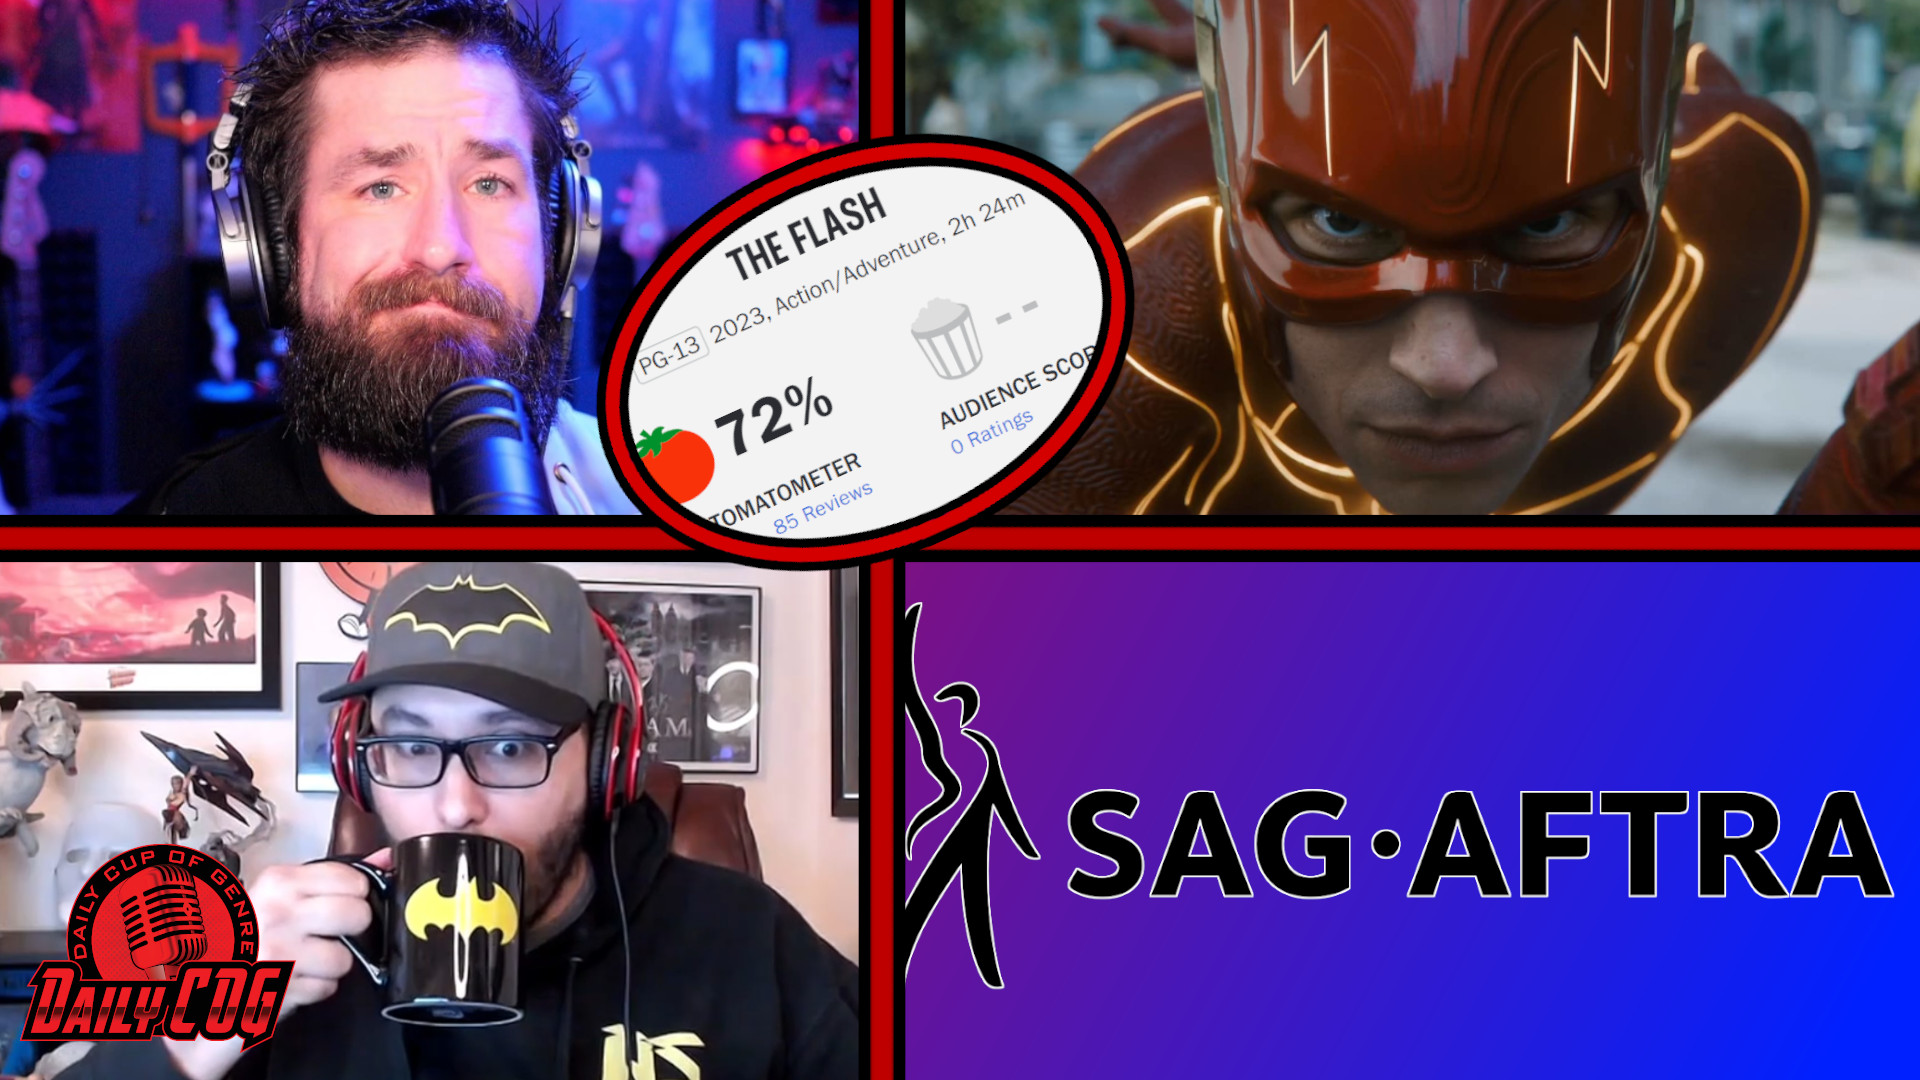 The Flash Reviews Are Mixed & SAG-AFTRA Authorizes Strike | D-COG